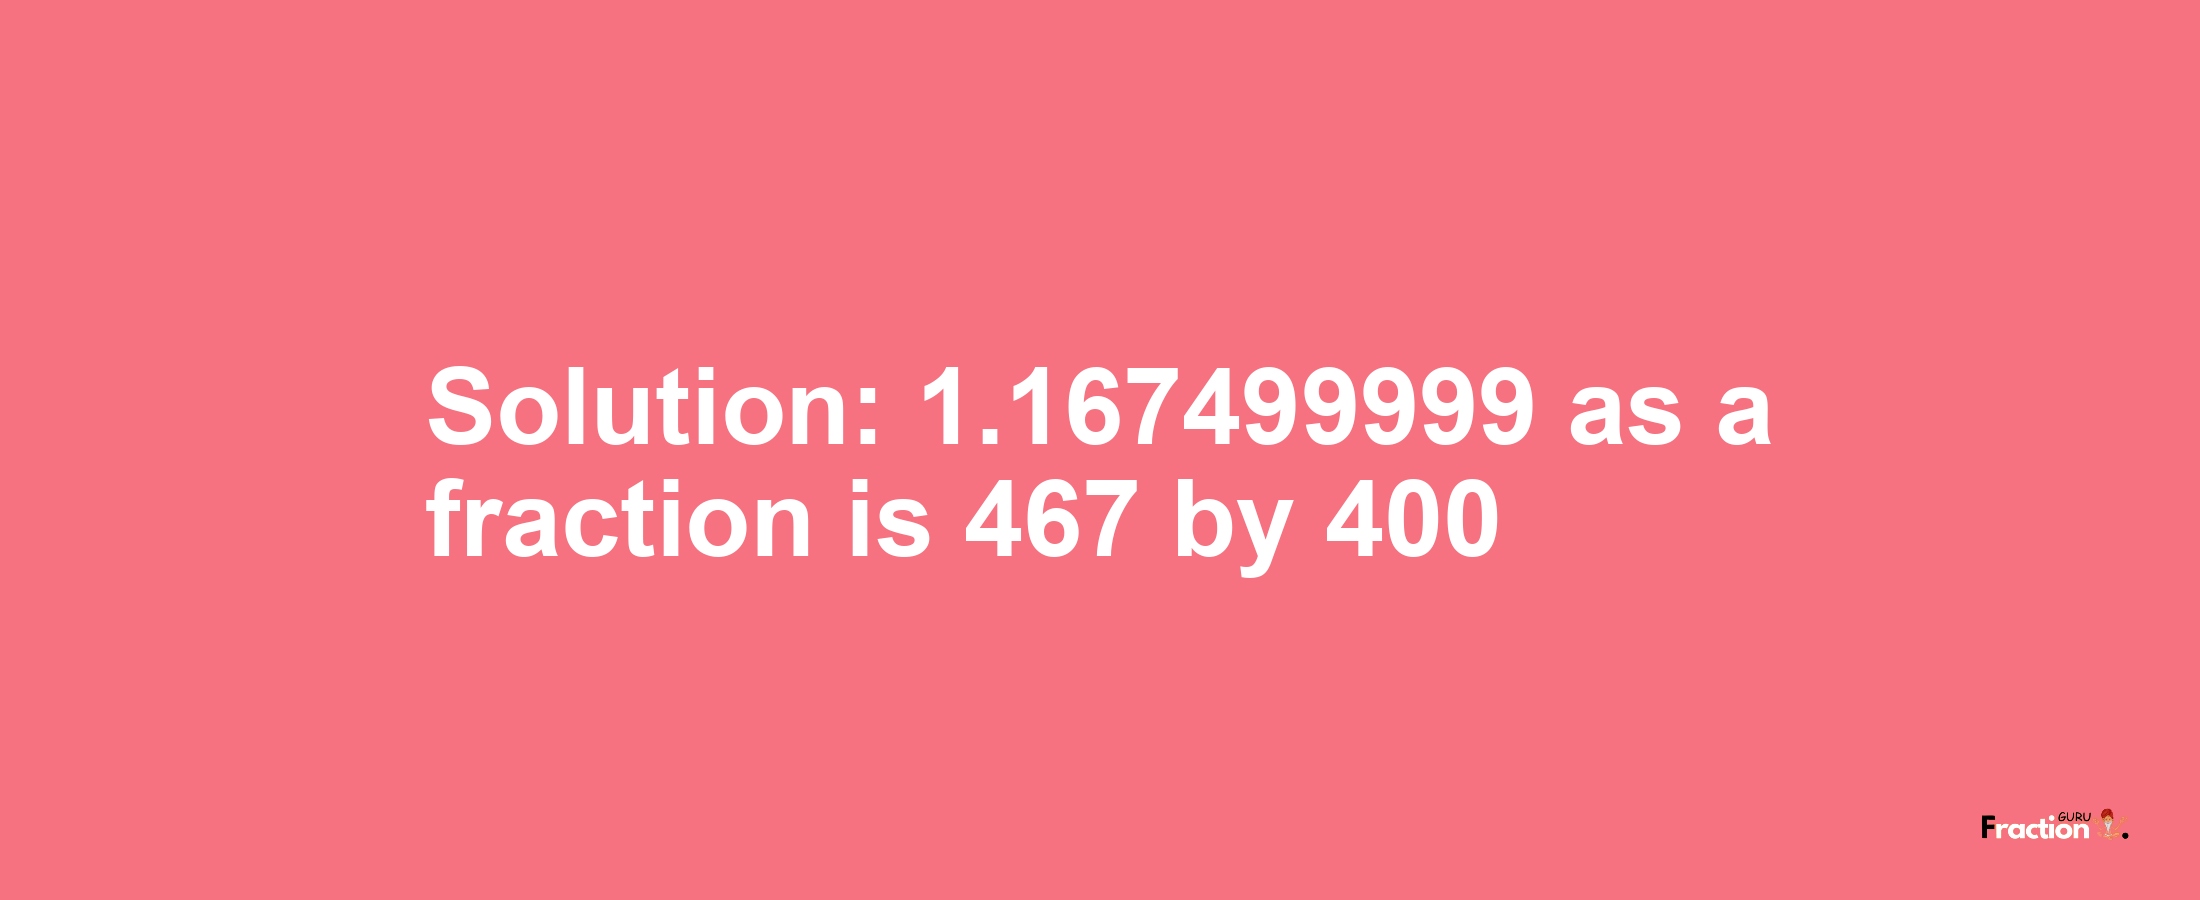 Solution:1.167499999 as a fraction is 467/400